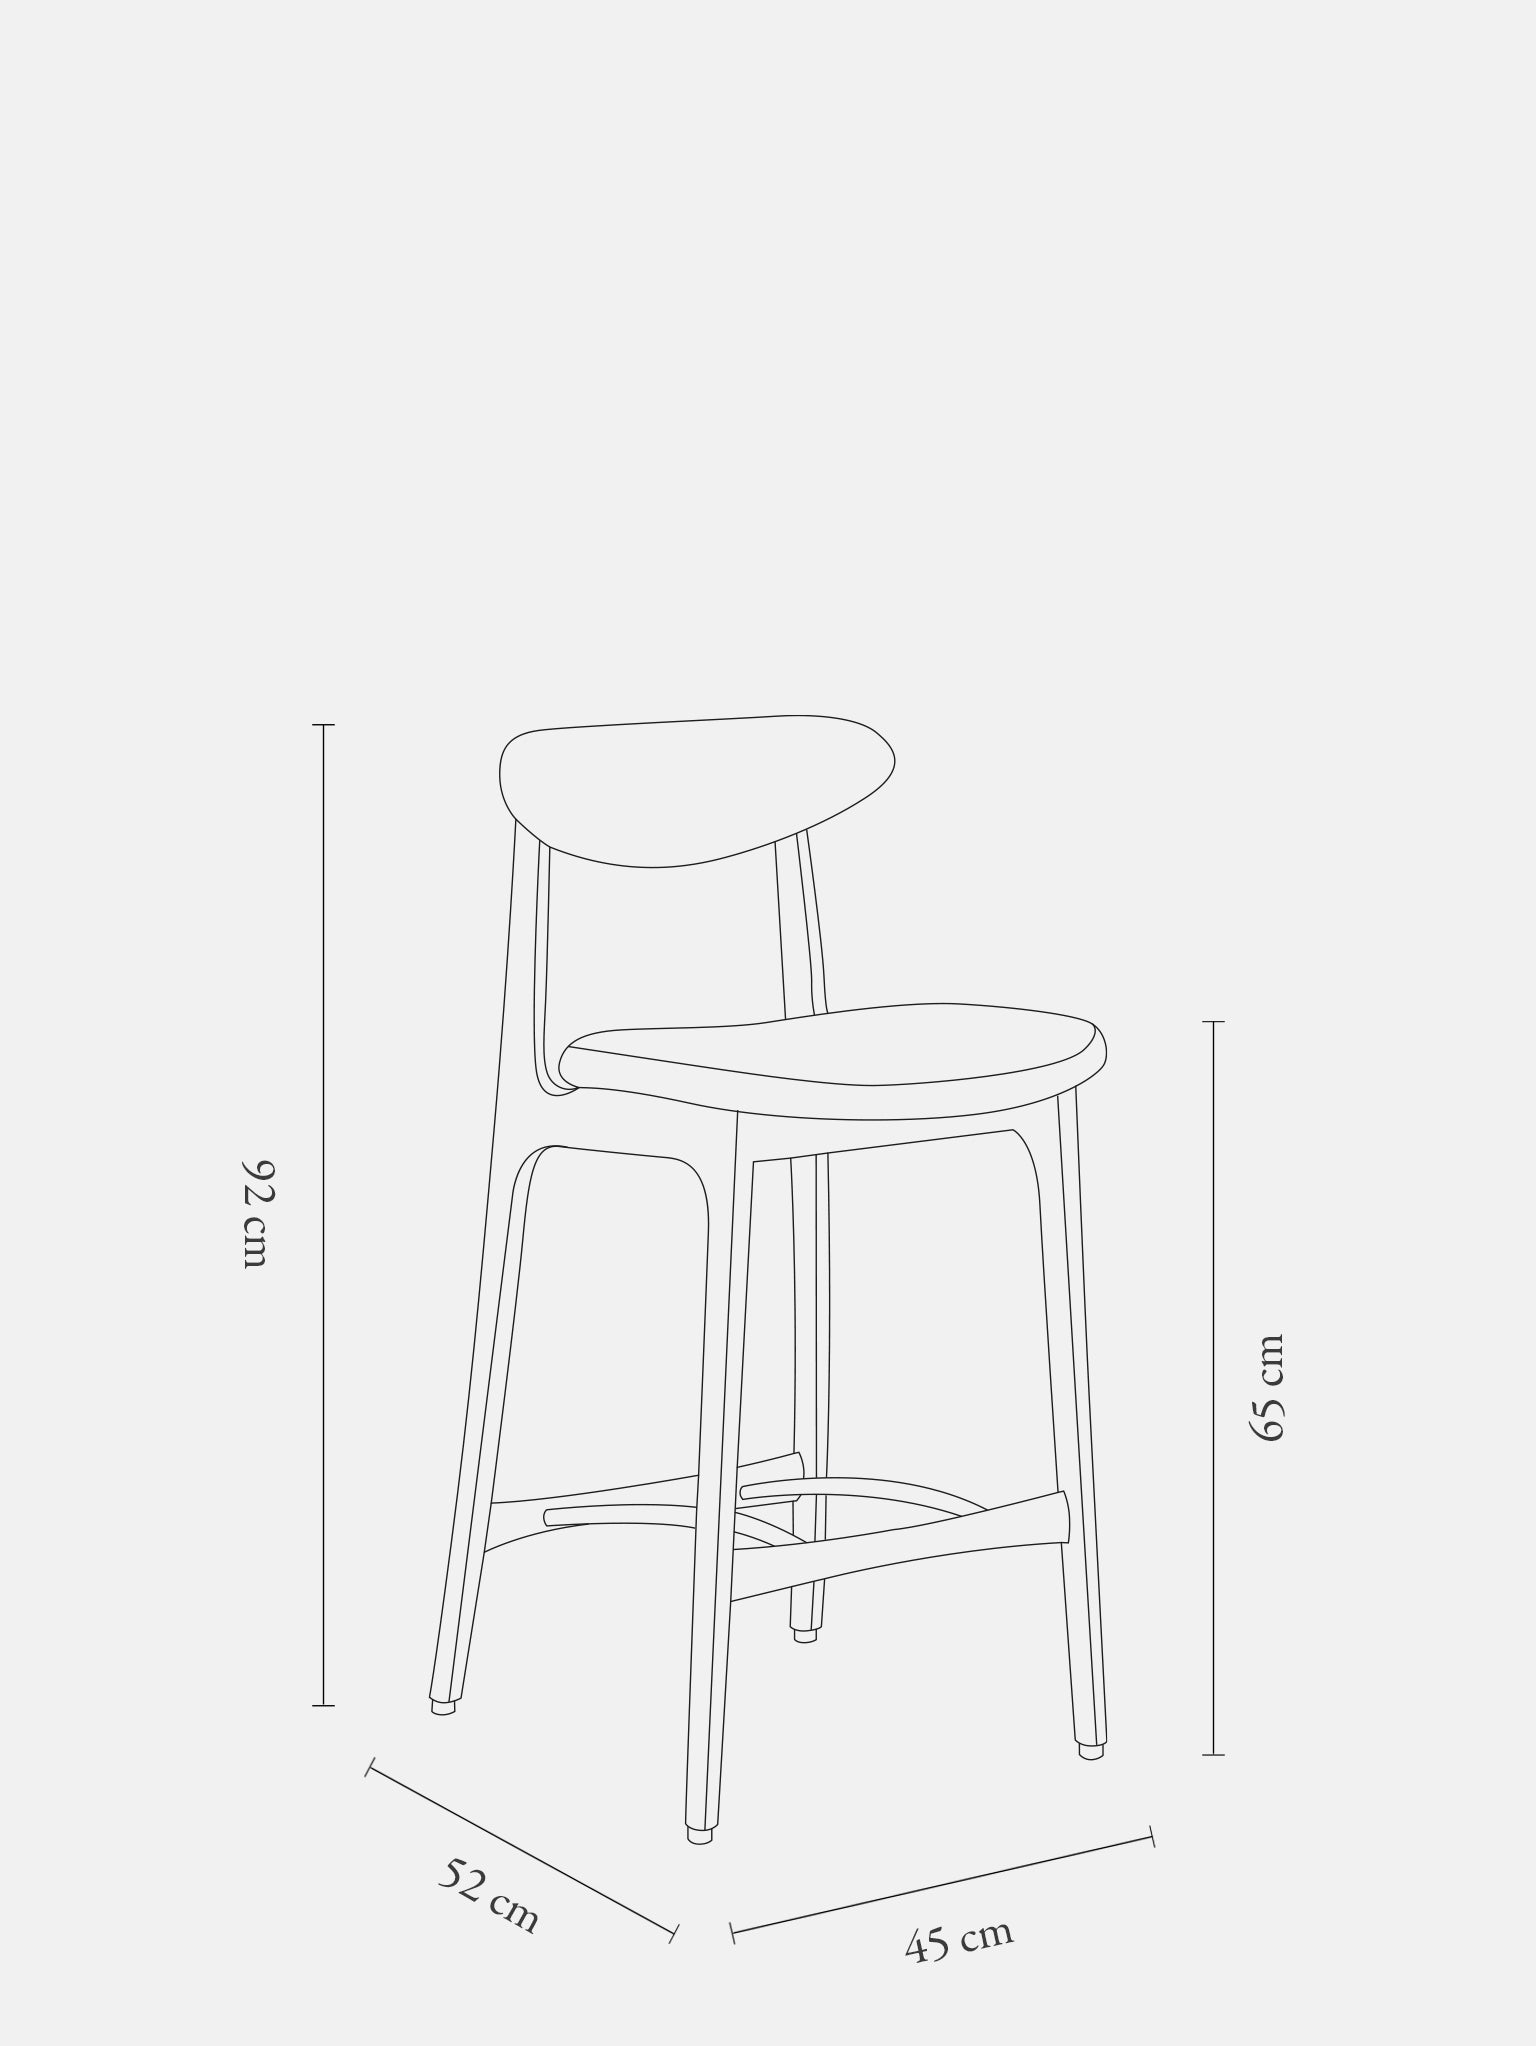 200-190 BAR STOOL S/65 – Beige in Boucle Creme Fabric